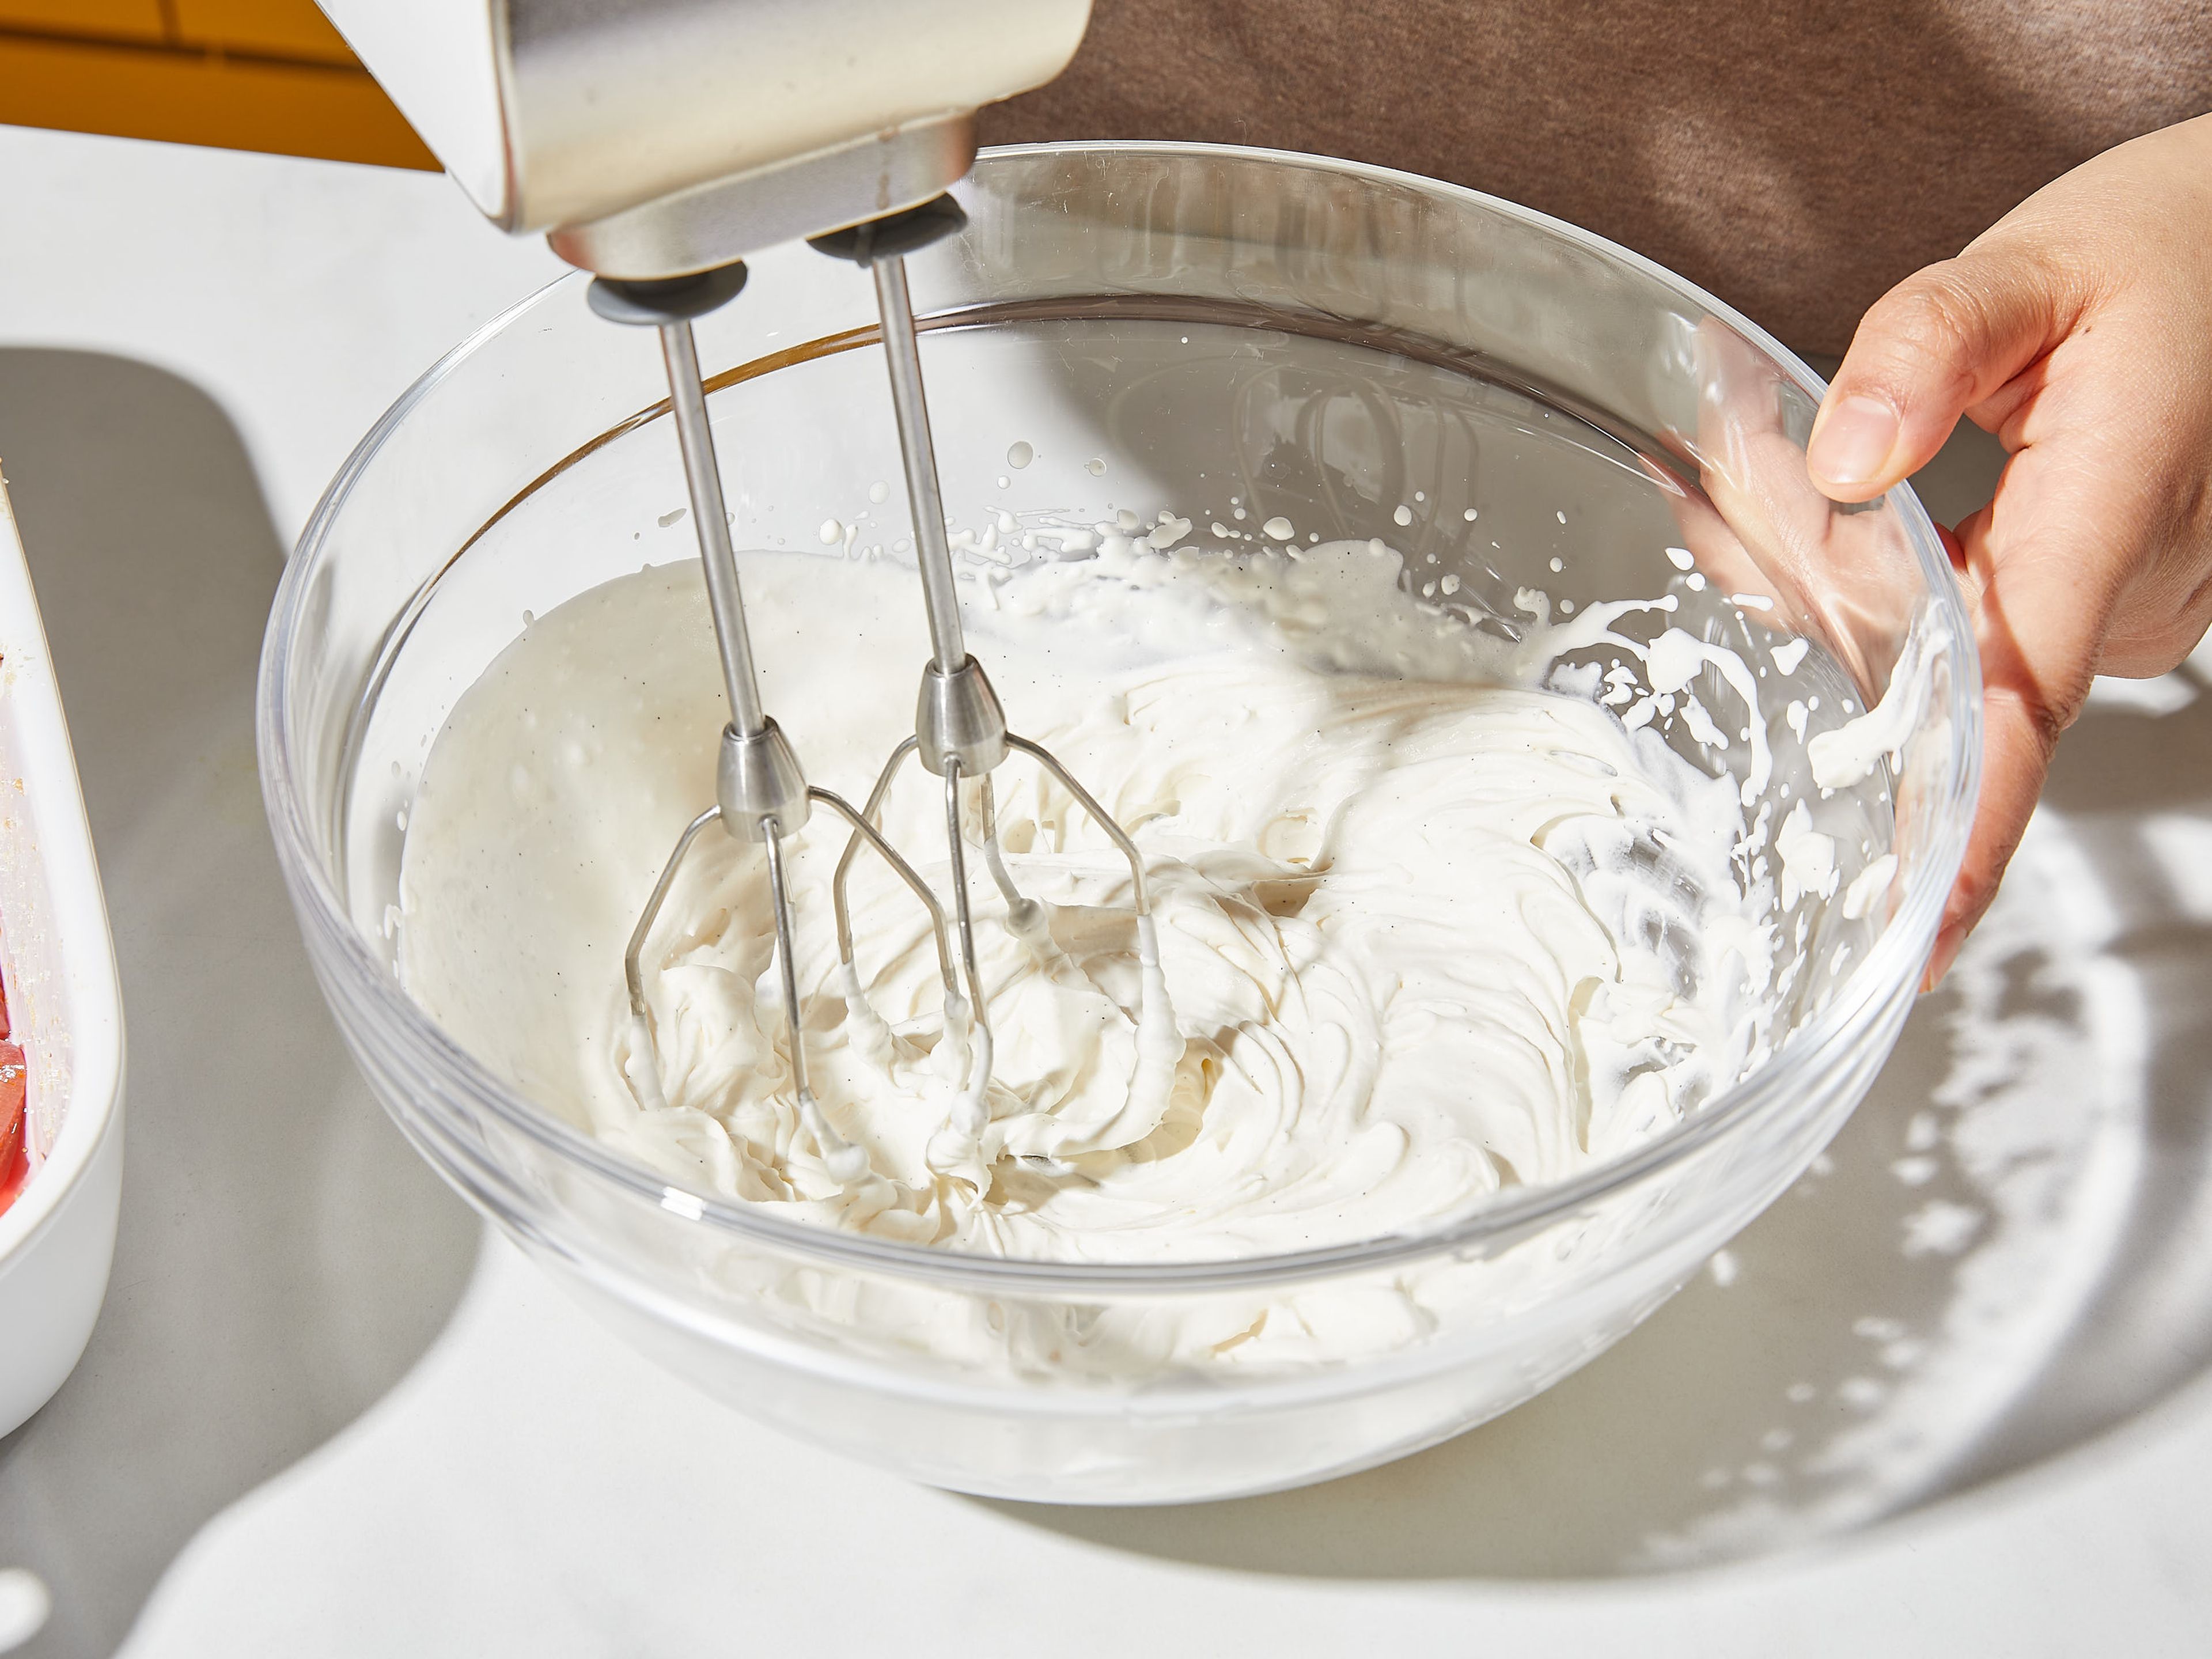 Use a hand mixer with beaters to whip heavy cream and vanilla extract in a large bowl, until soft peaks form, then add remaining sugar, beat until stiff. Gently fold in the quark. Add whipped cream and rhubarb to serving glasses or arrange on plates. Garnish with chopped pistachios. Serve immediately and enjoy!